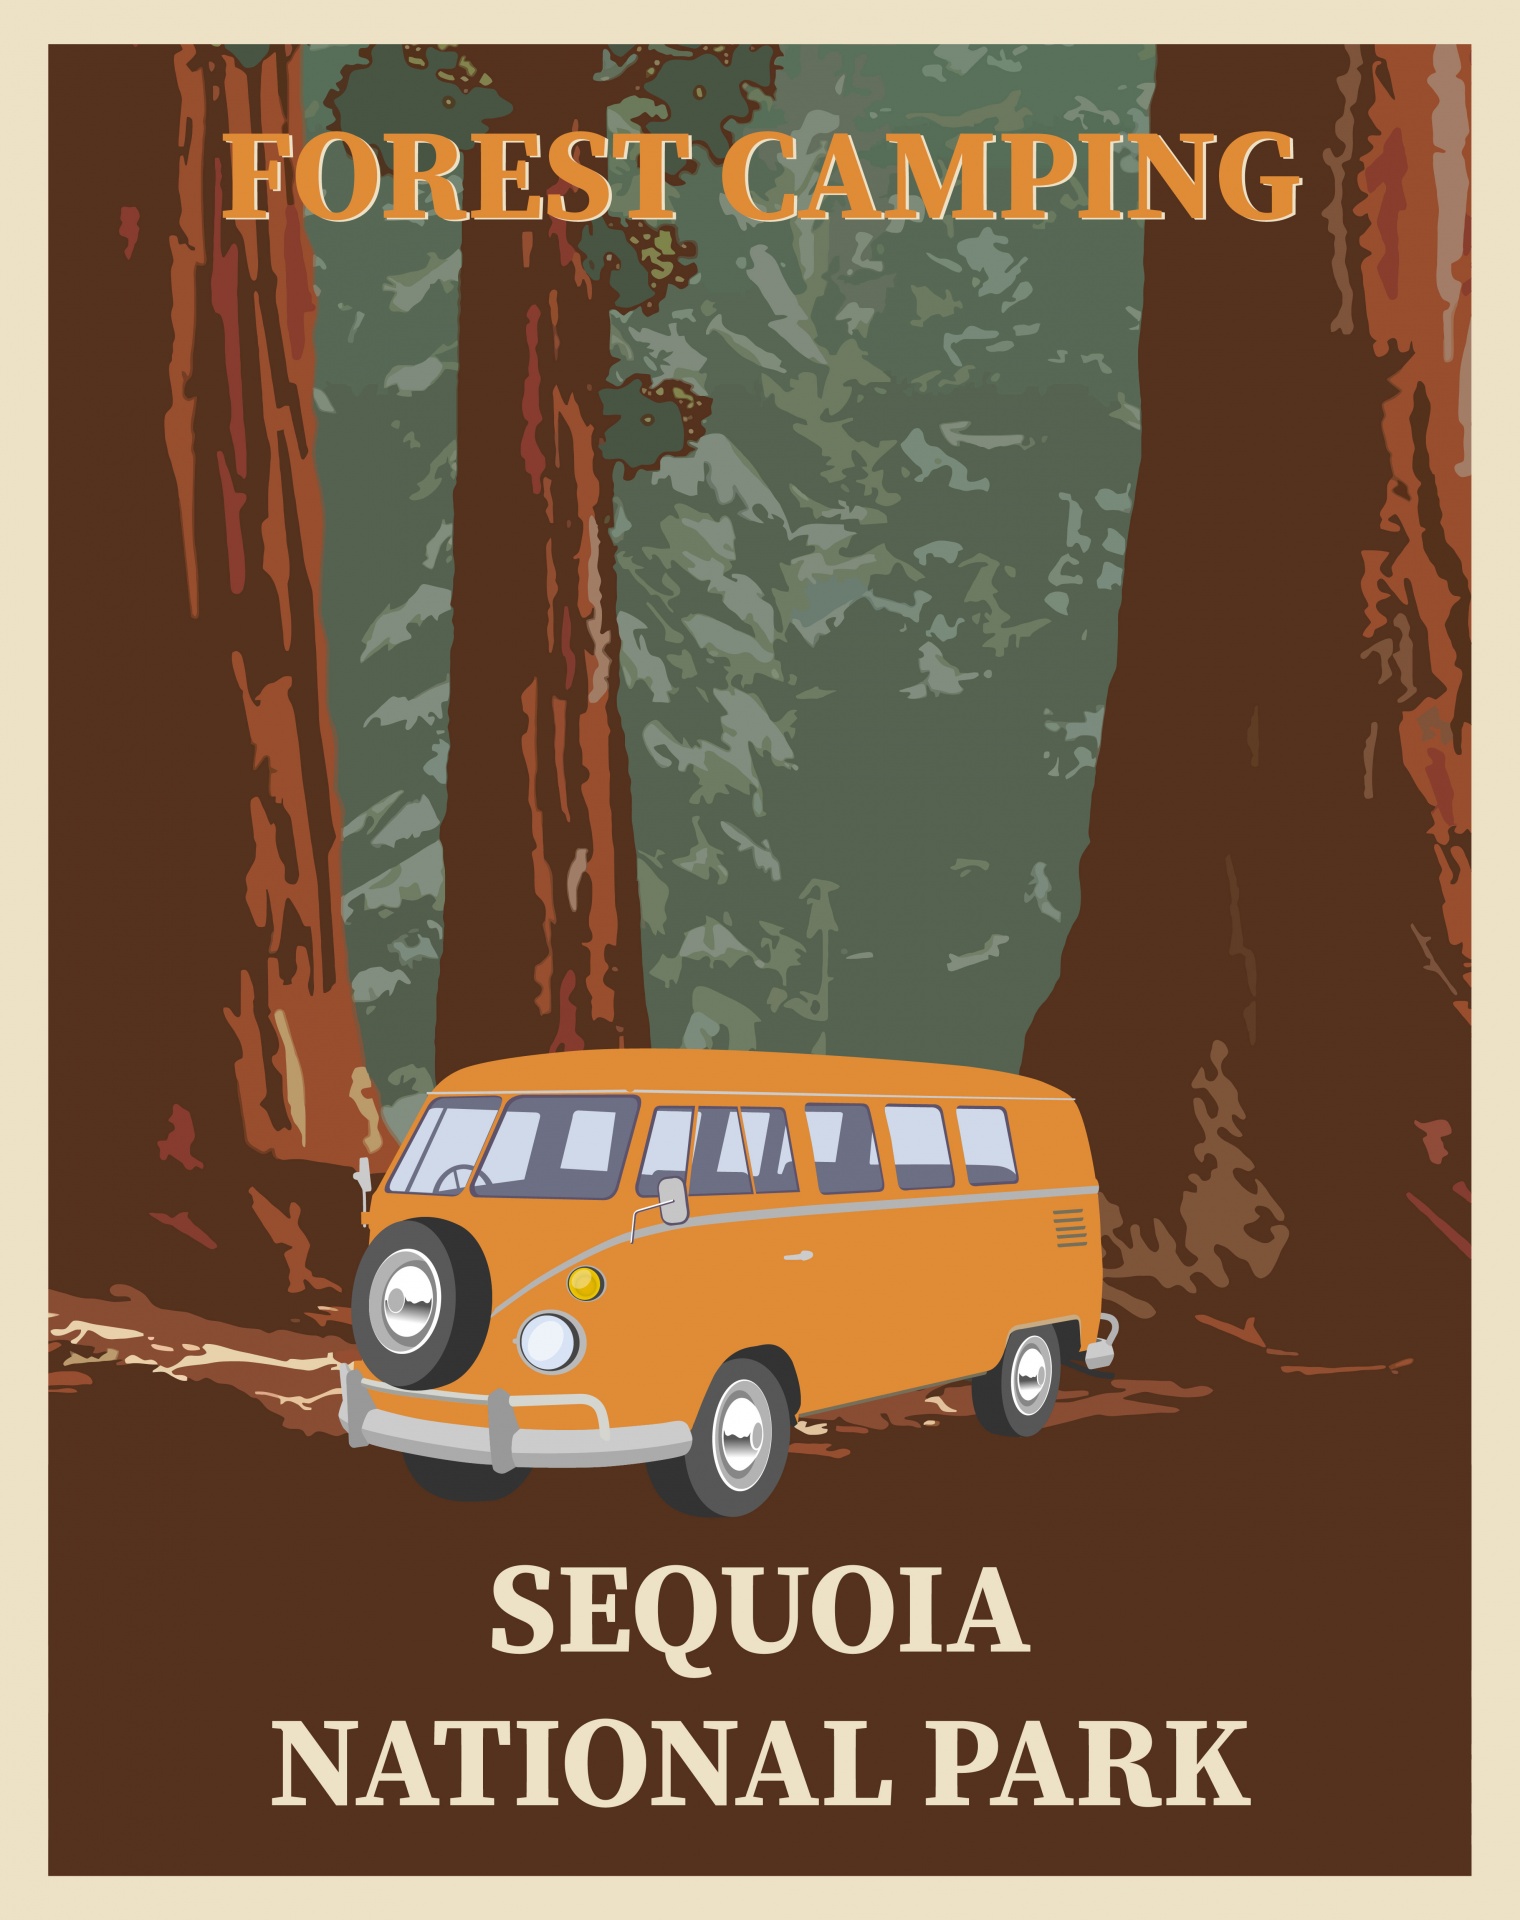 Retro, vintage style travel poster for camping in Sequoia National Park, California with vw camper van and giant redwood trees